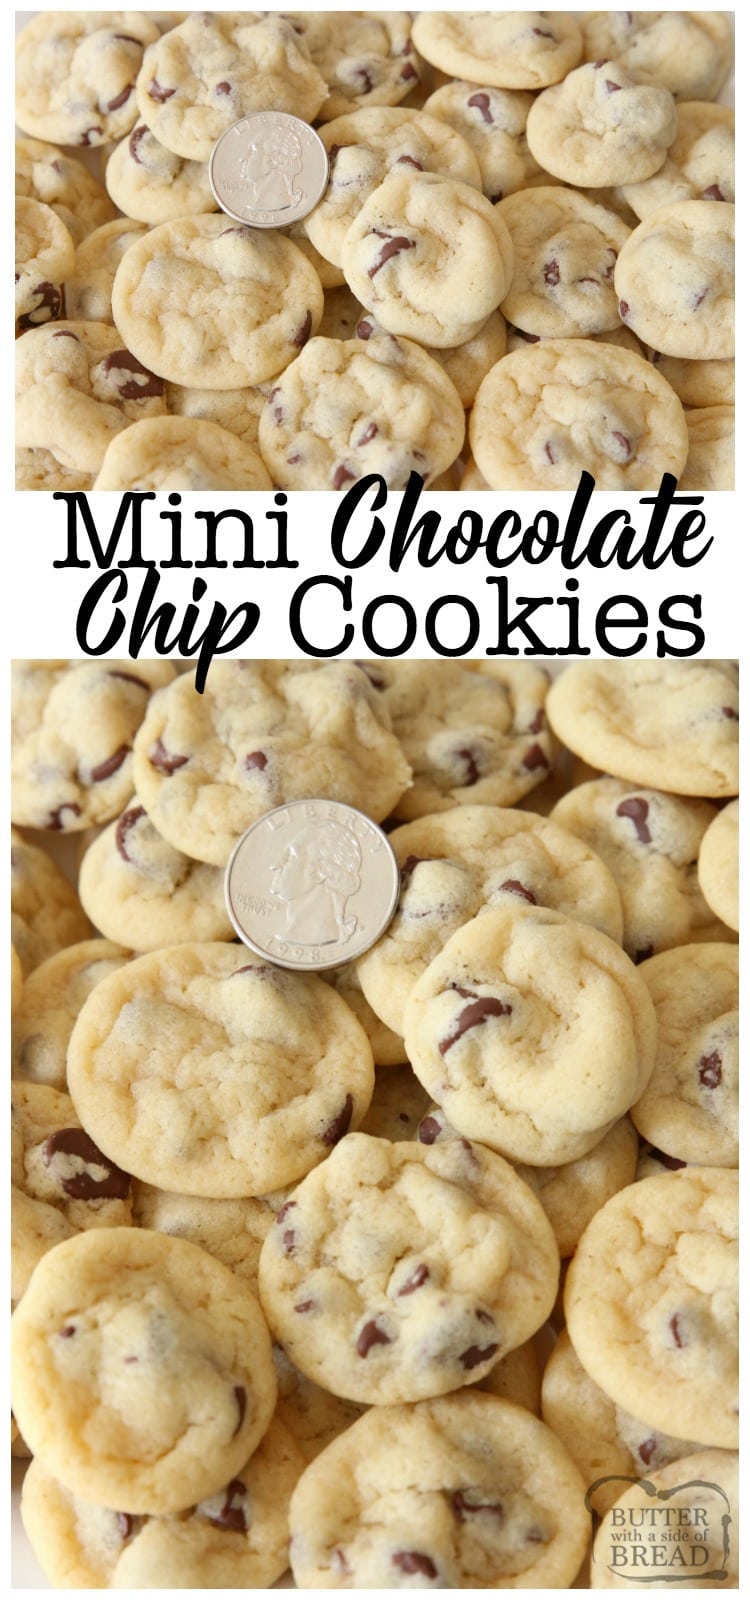 Mini Chocolate Chip Cookies are teeny tiny chocolate chip cookies about the size of a quarter! Soft, chewy poppable cookies that are perfect for parties.